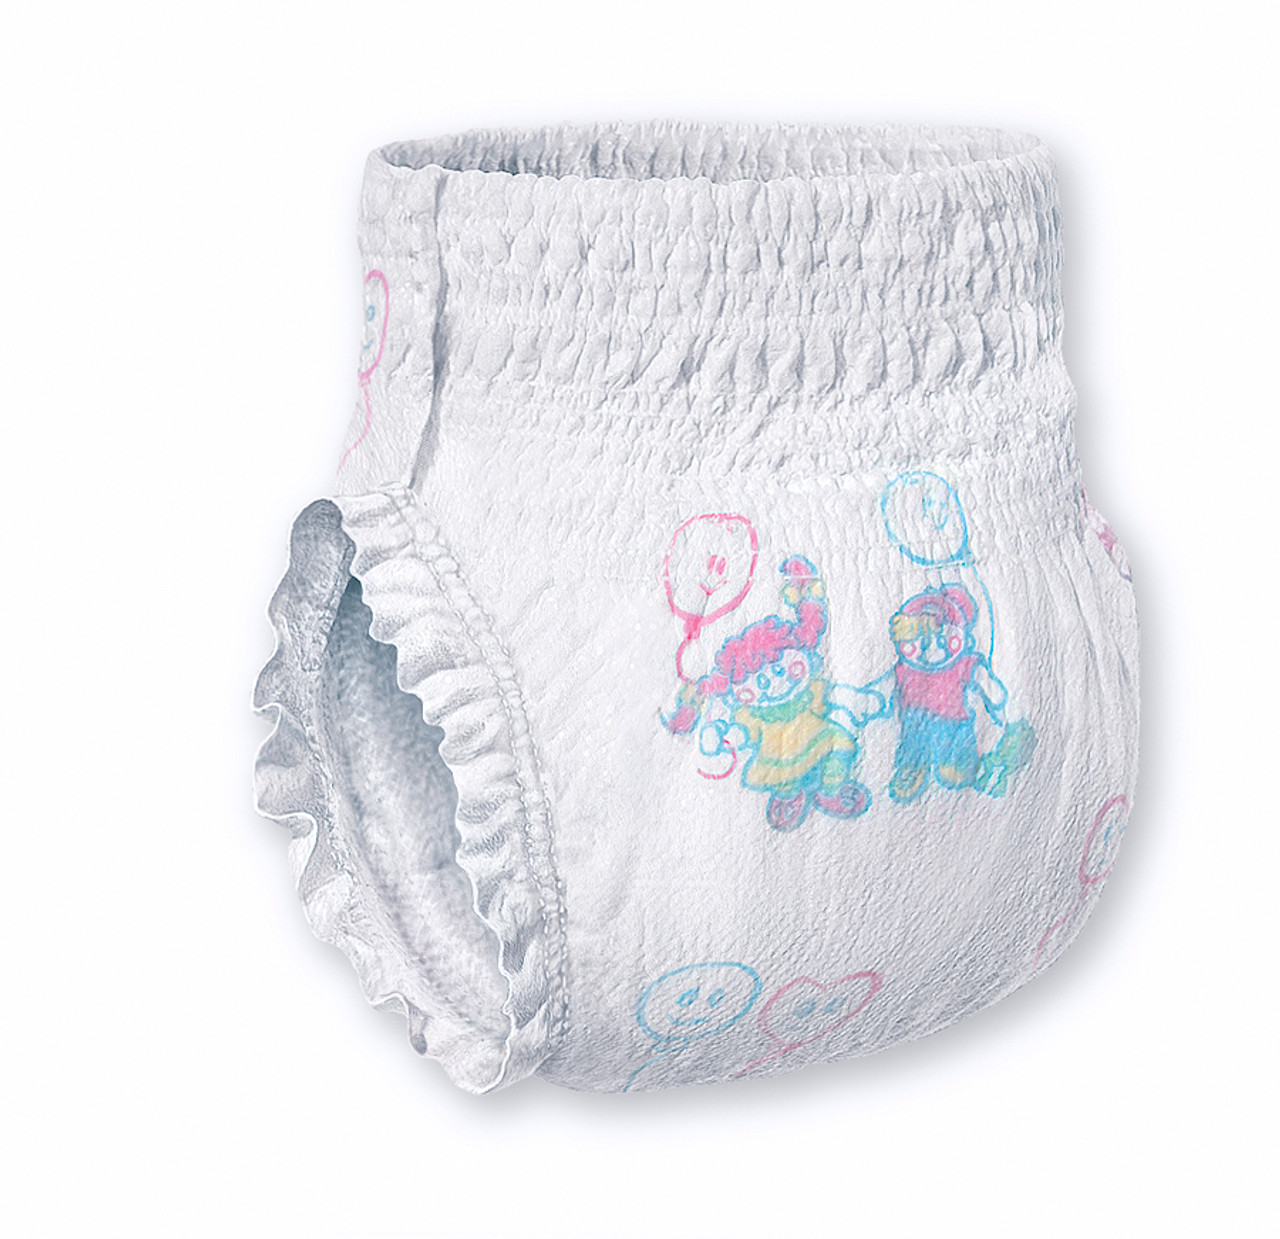 Pampers Easy Ups Training Pants reviews in Diapers - Disposable